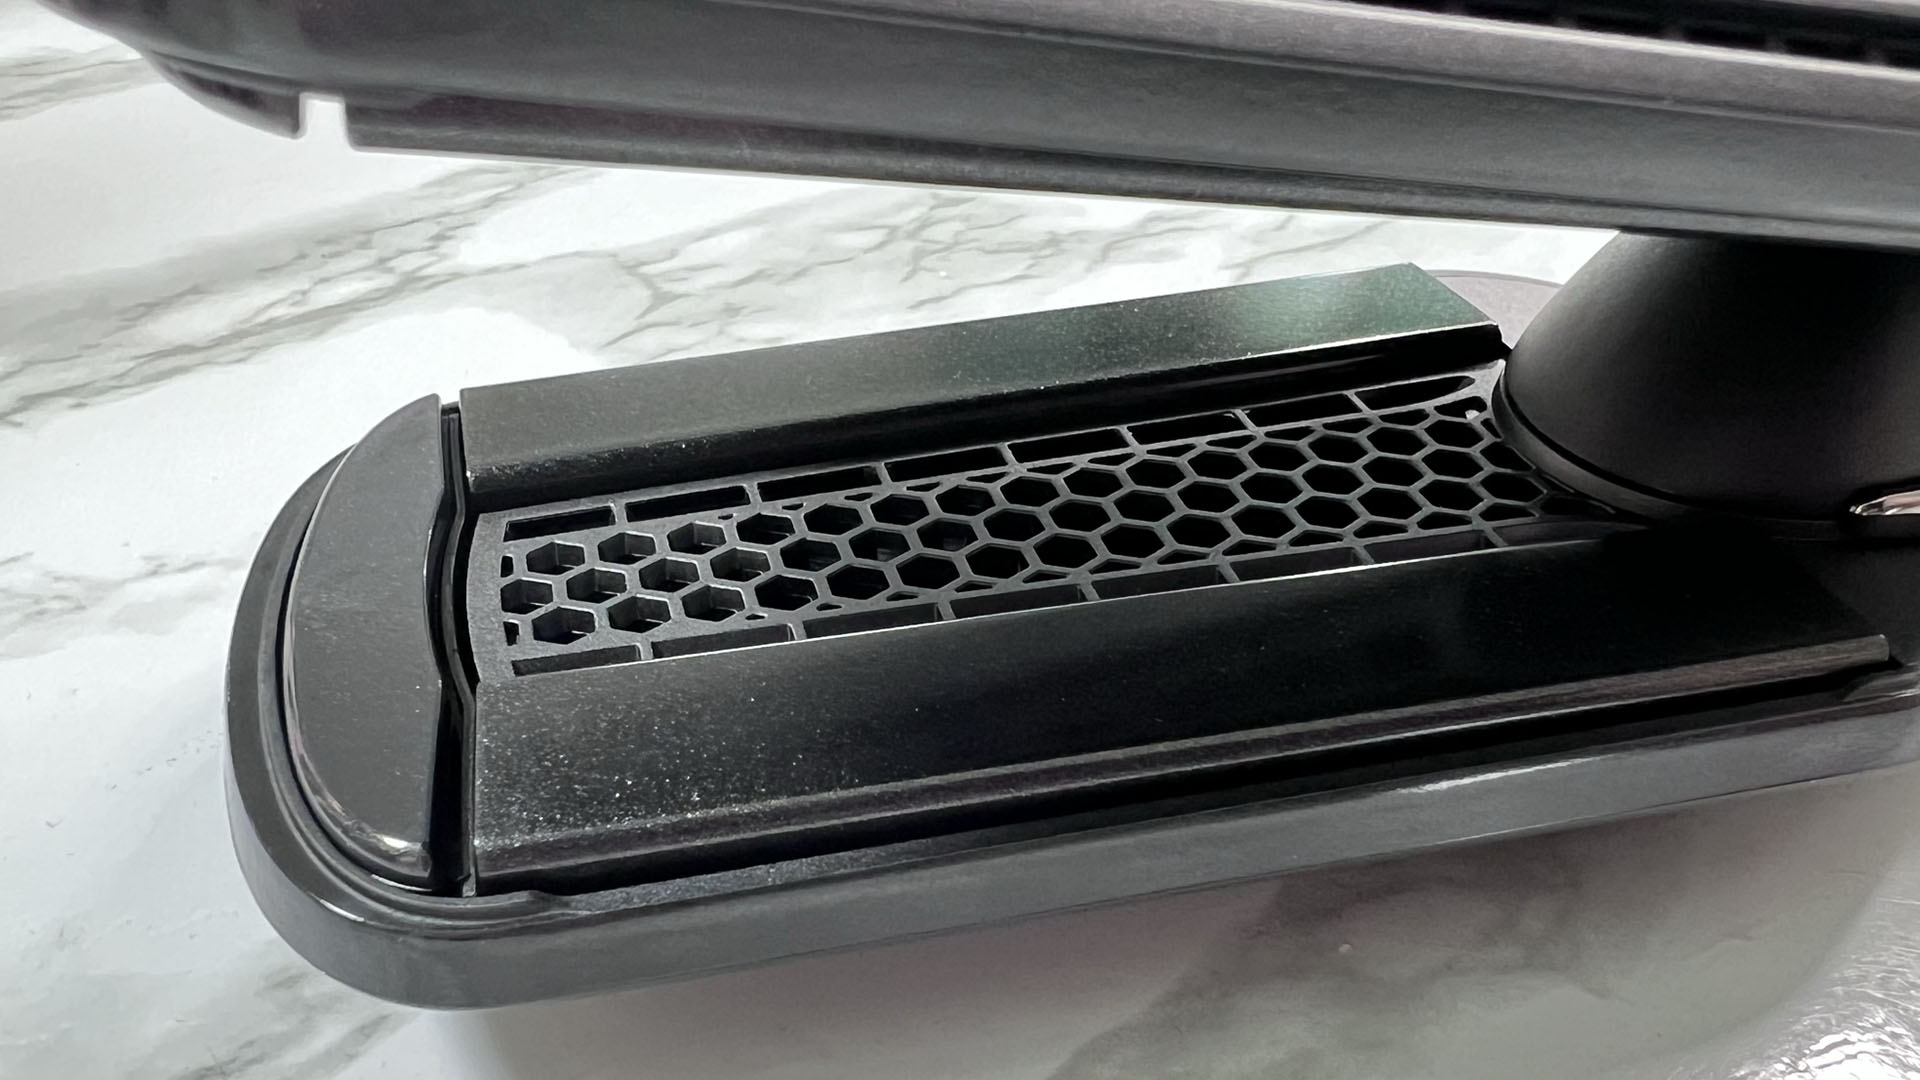 Grille between the plates on GHD Duet Style hair styler